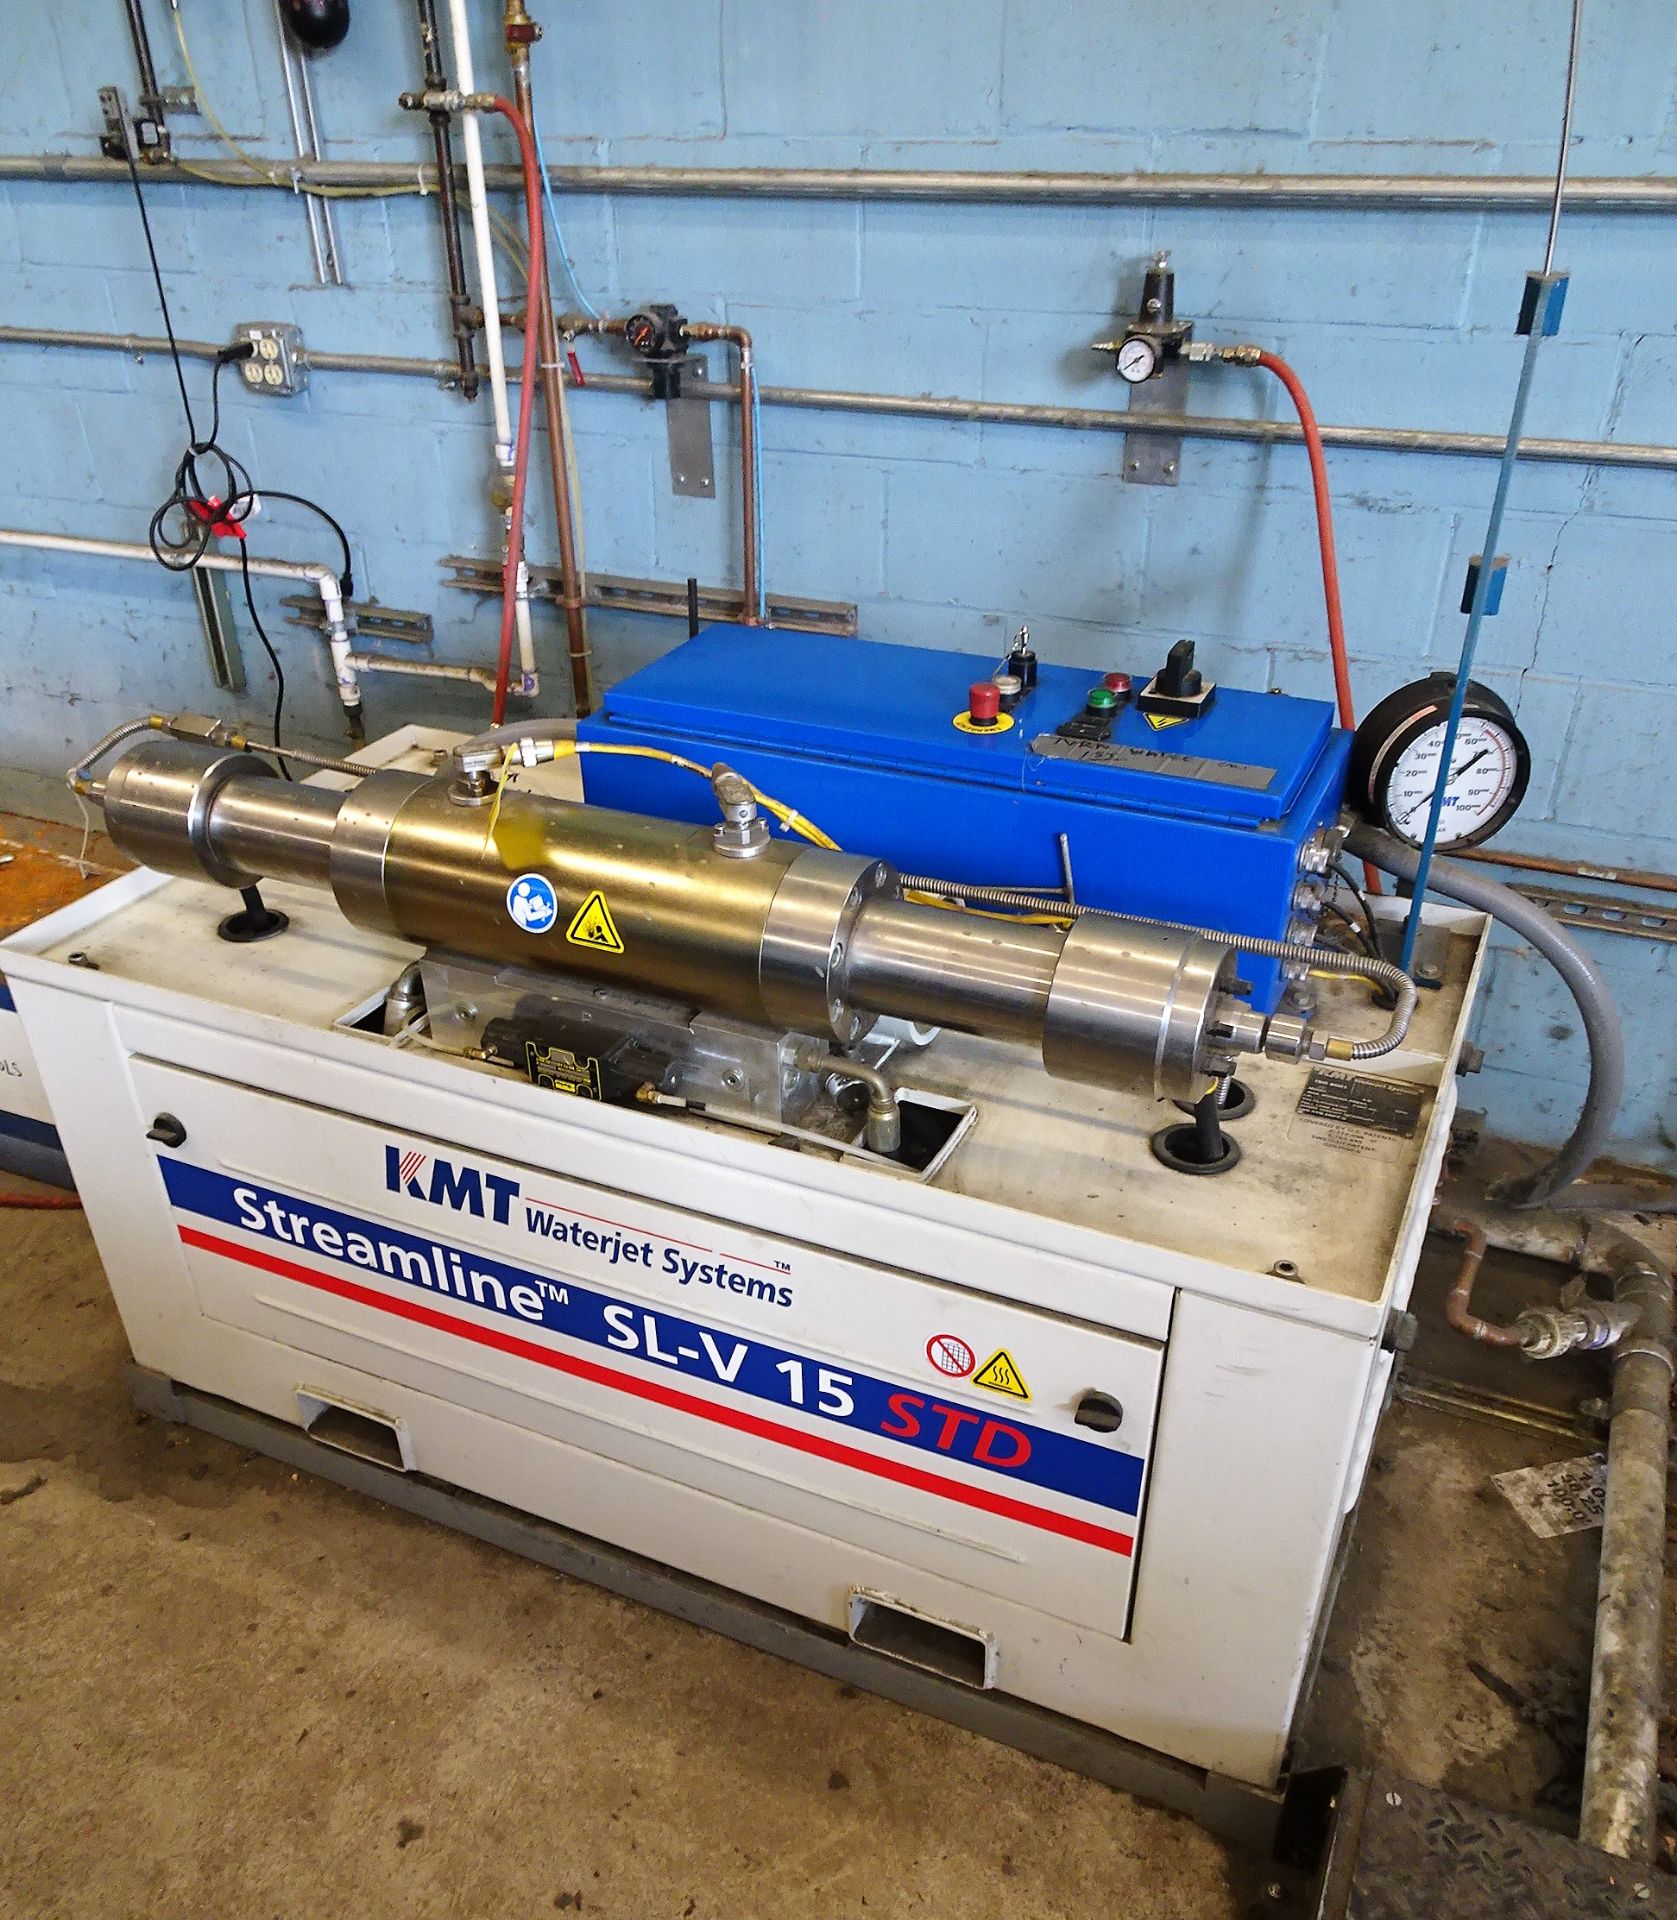 Lockformer Mdl. Vulcan 1600-WJ Vulcan Water Jet Insulation Cutting System, with 5' x 10 Cutting - Image 5 of 8